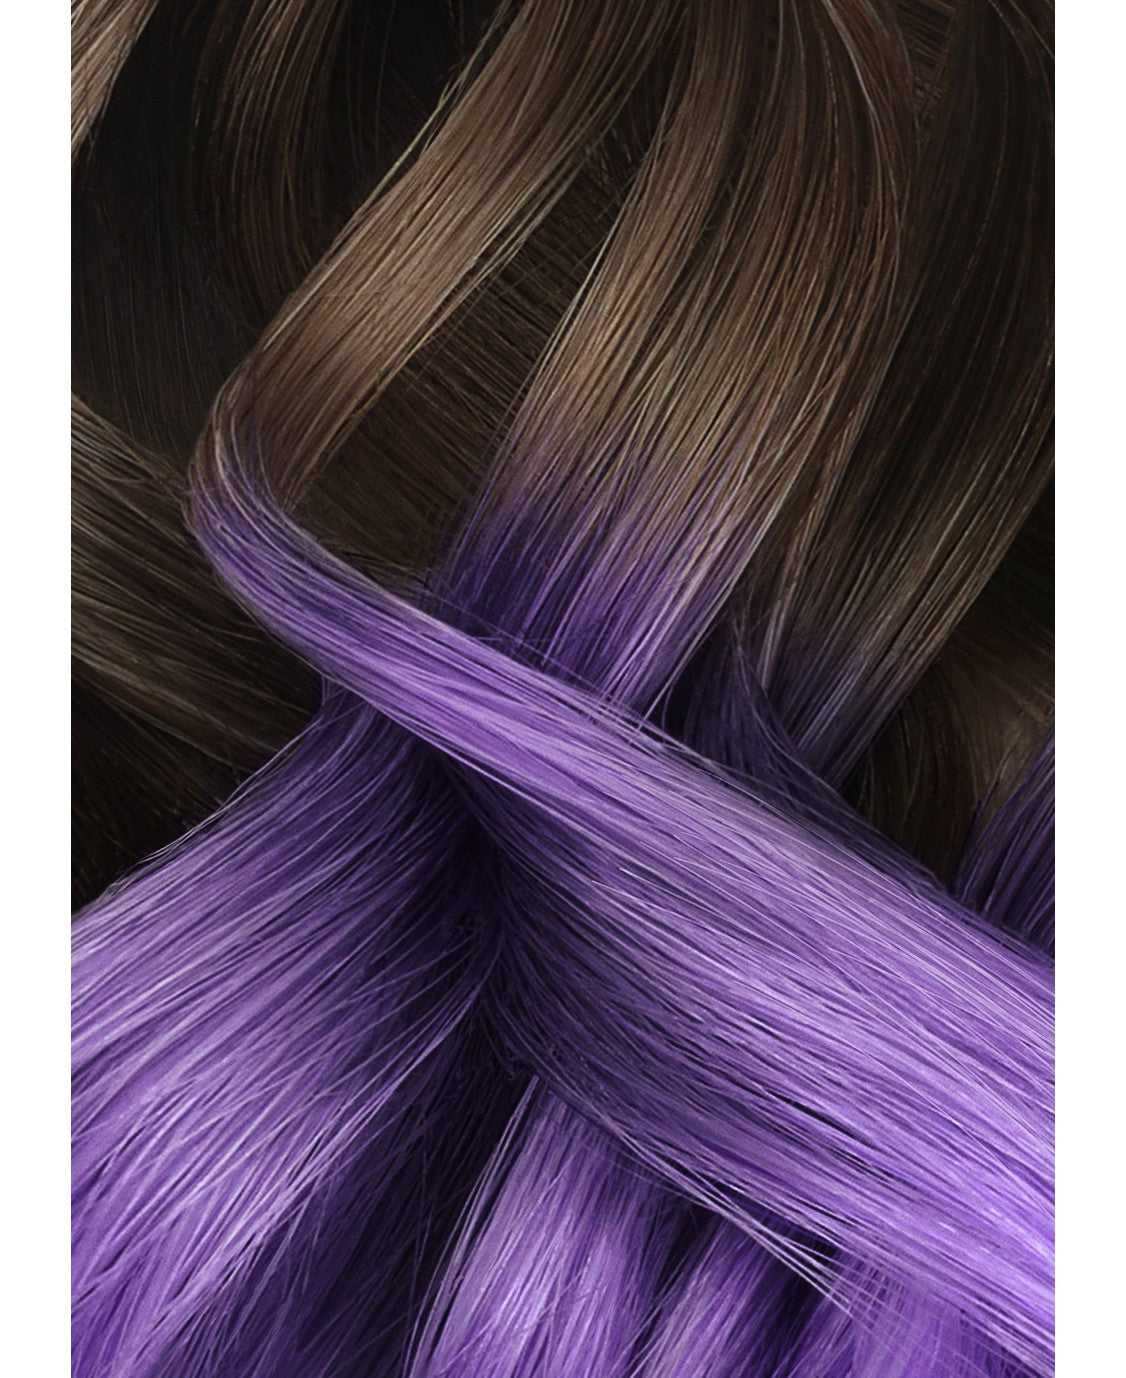 Hair, Purple, Violet, Magenta, Material property, Electric blue, Pattern, Symmetry, Fashion accessory, Graphics